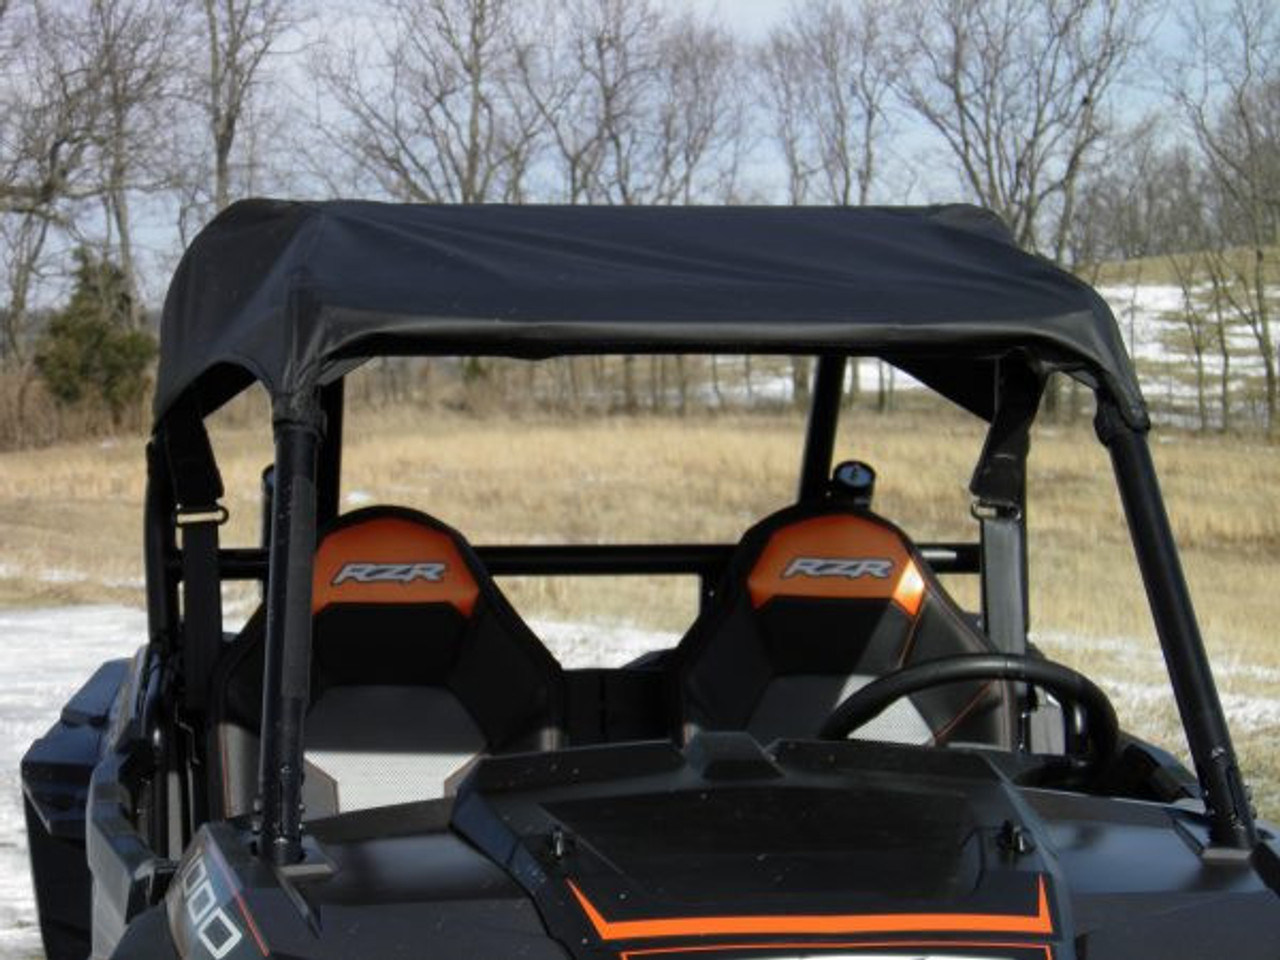 3 Star side x side accessories Polaris RZR XP1000/XP Turbo/S1000 soft top front view